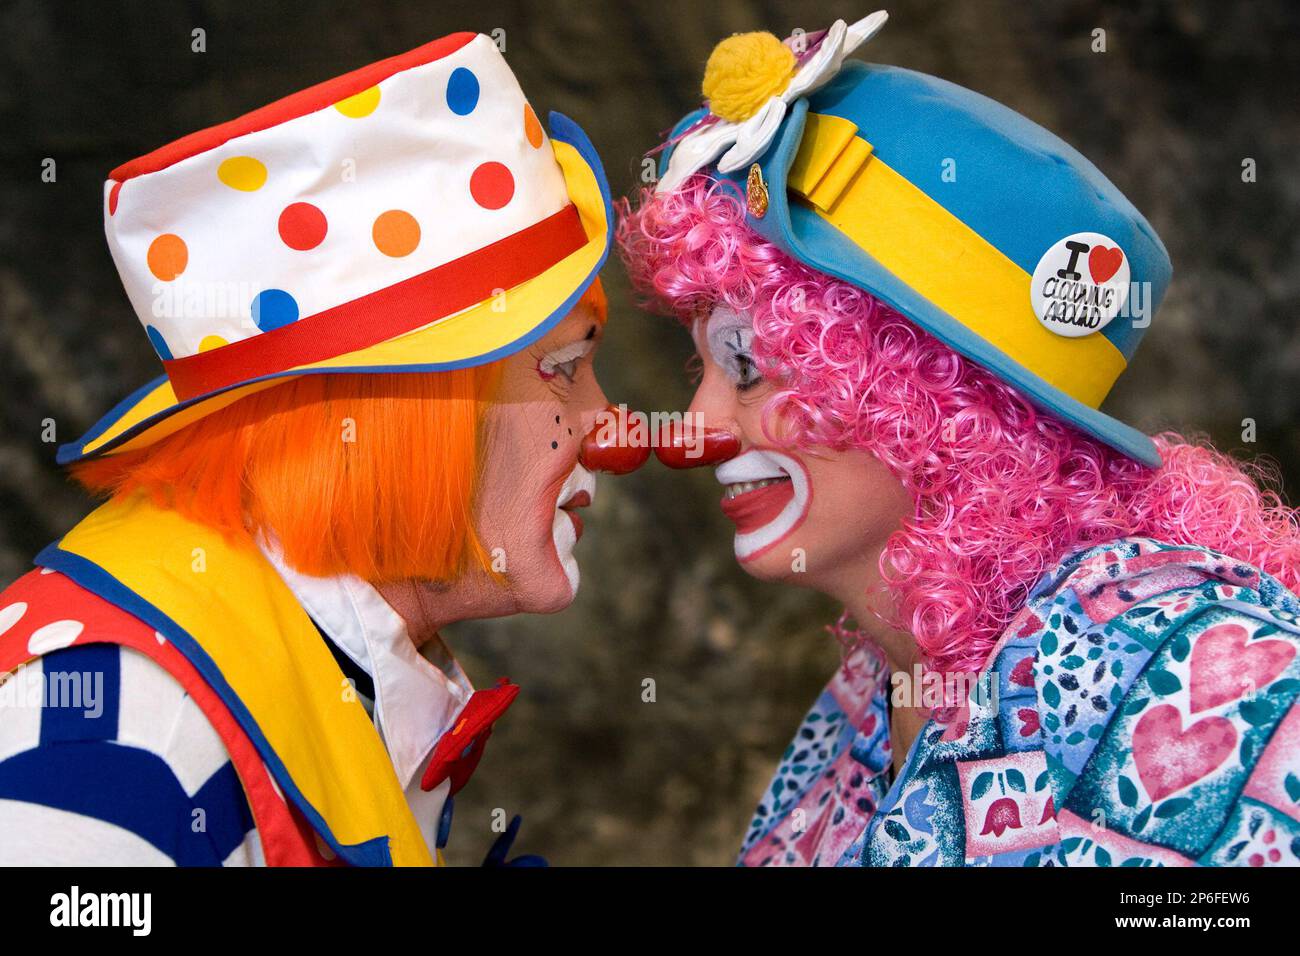 Jay J. the clown as known as James Caffrey, left, and LaDitzy the clown, also known as Debbie Fowler of Walcott, N.D. clown around at the Clowns of America International clown convention, Wednesday, April 25, 2012, in Kansas City. Mo. (AP Photo/The Kansas City Star, Tammy Ljungblad) Stockfoto